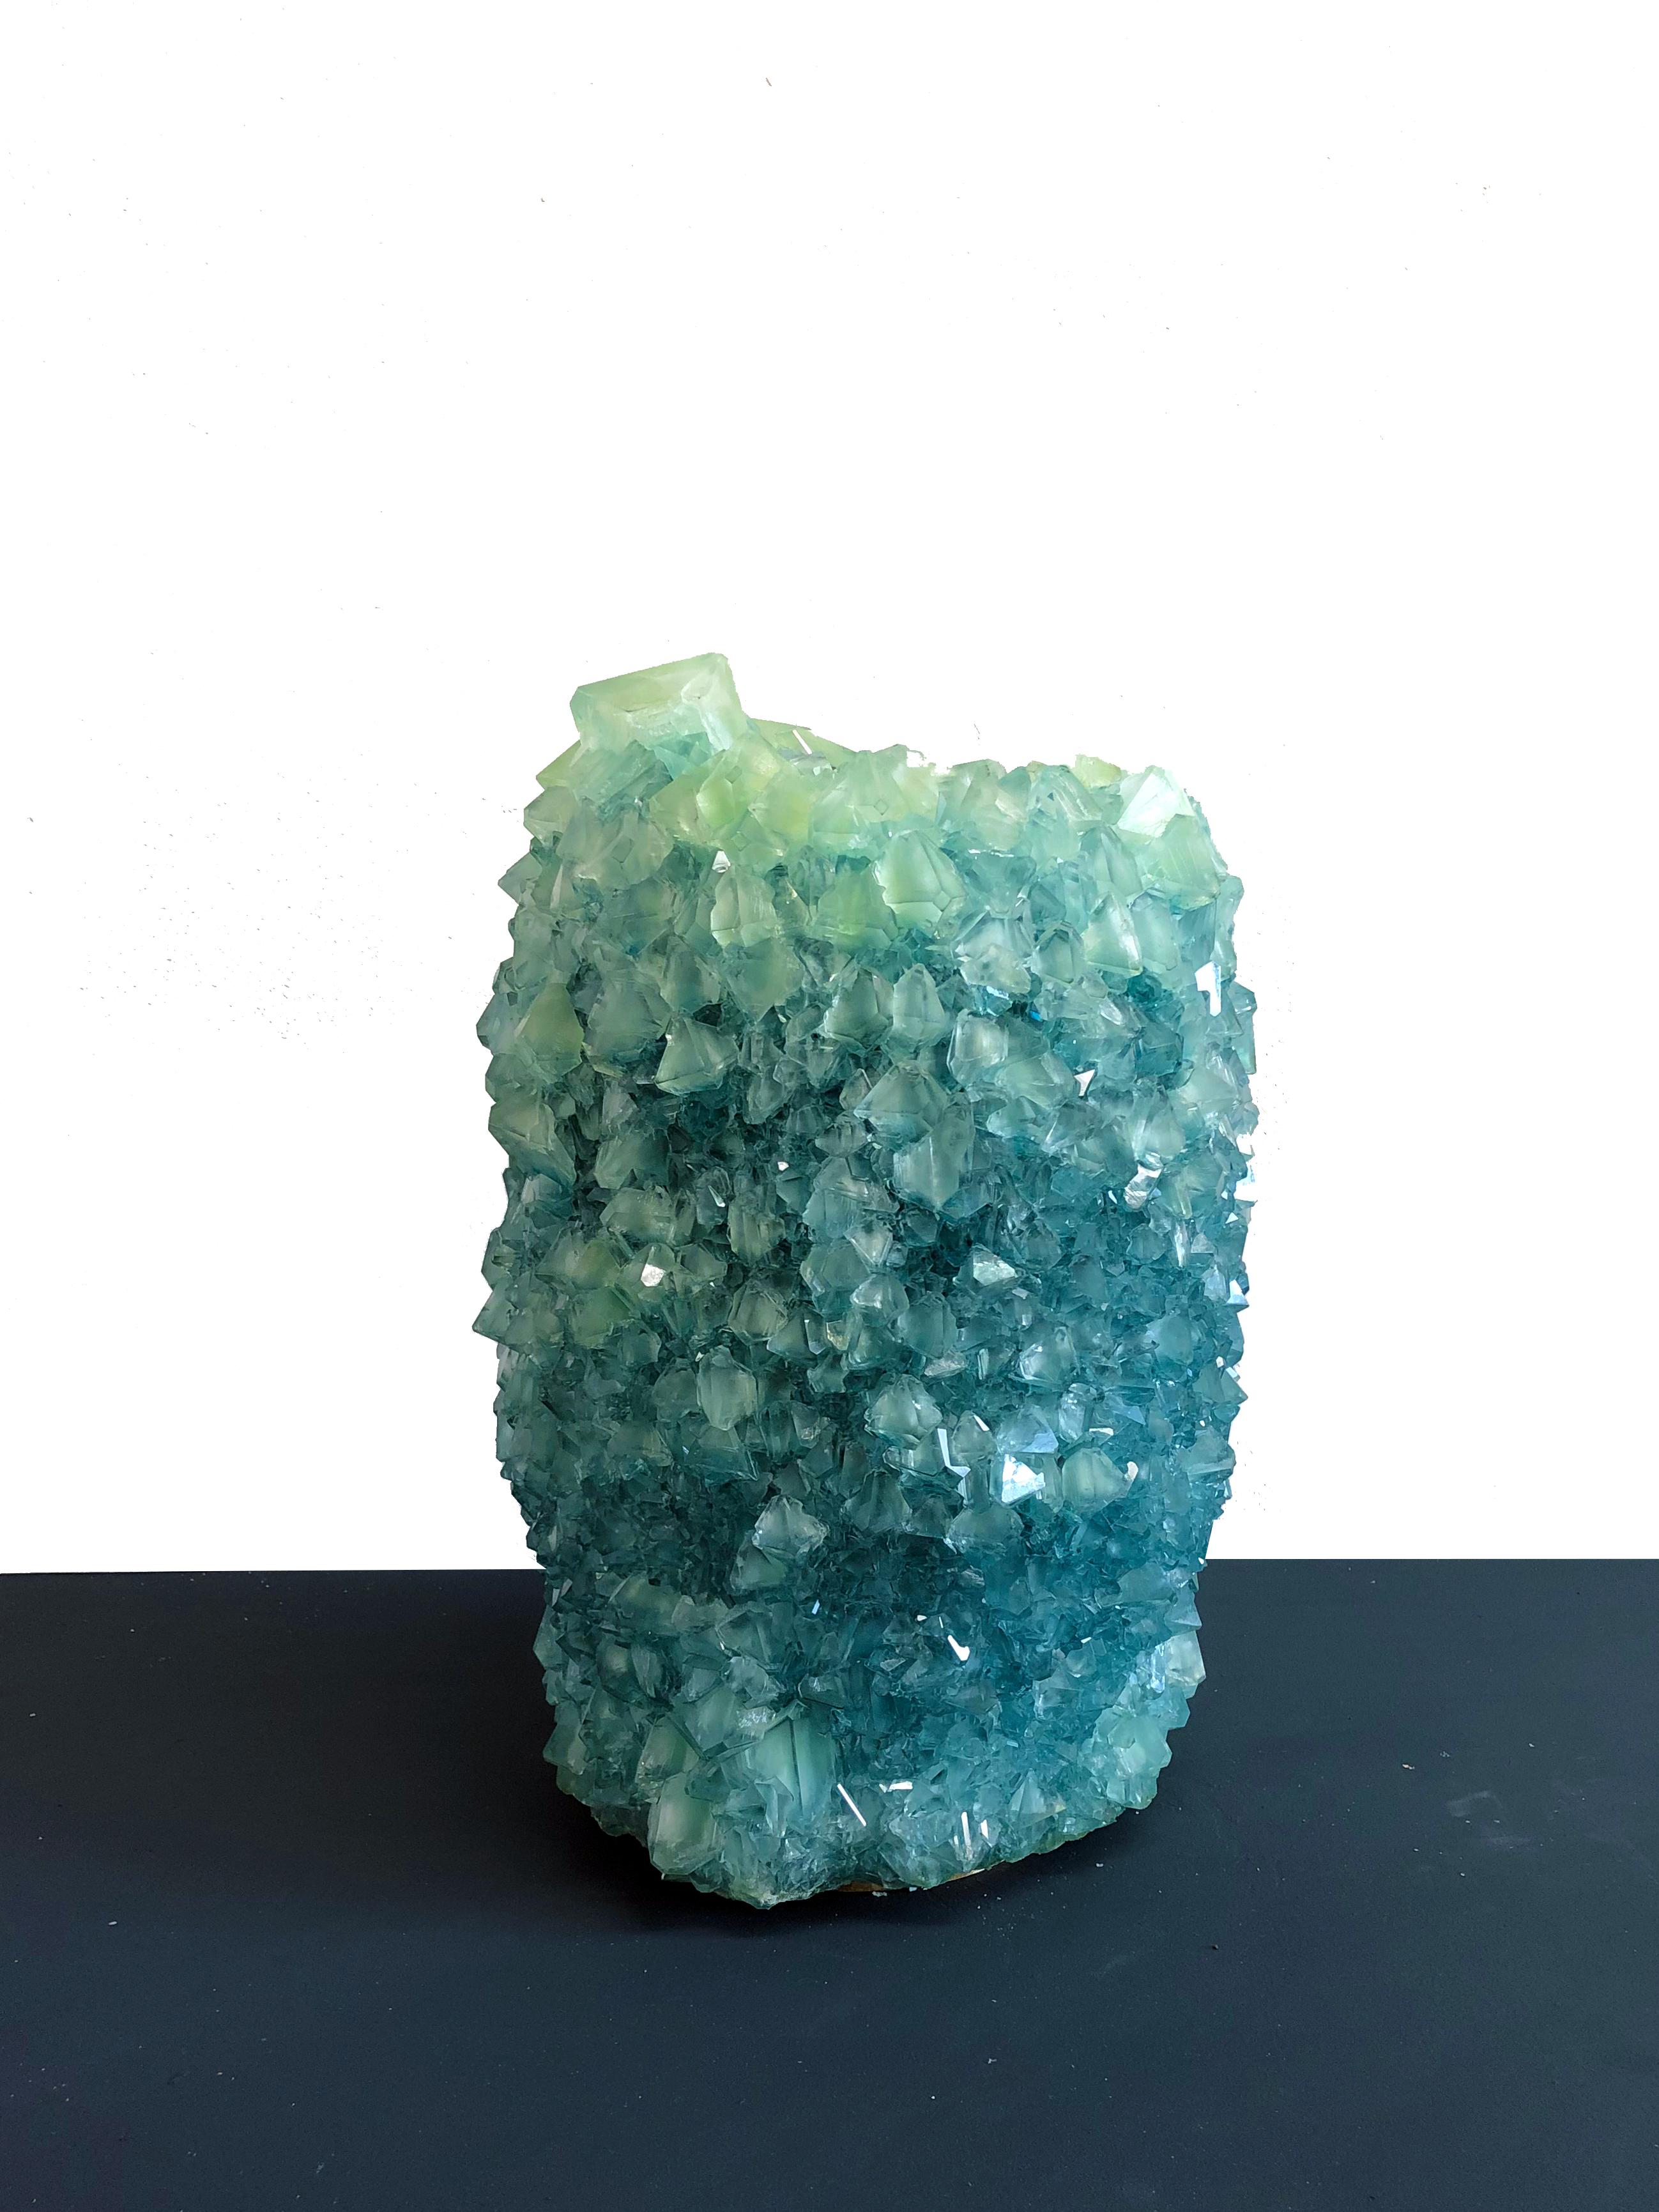 The ‘Crystal’ series is the result of research into stalagmites, one of the greatest wonders of nature. The growing process of the objects can be seen as a metaphor for time. Each object is unique in shape, colour and texture, due to the organic